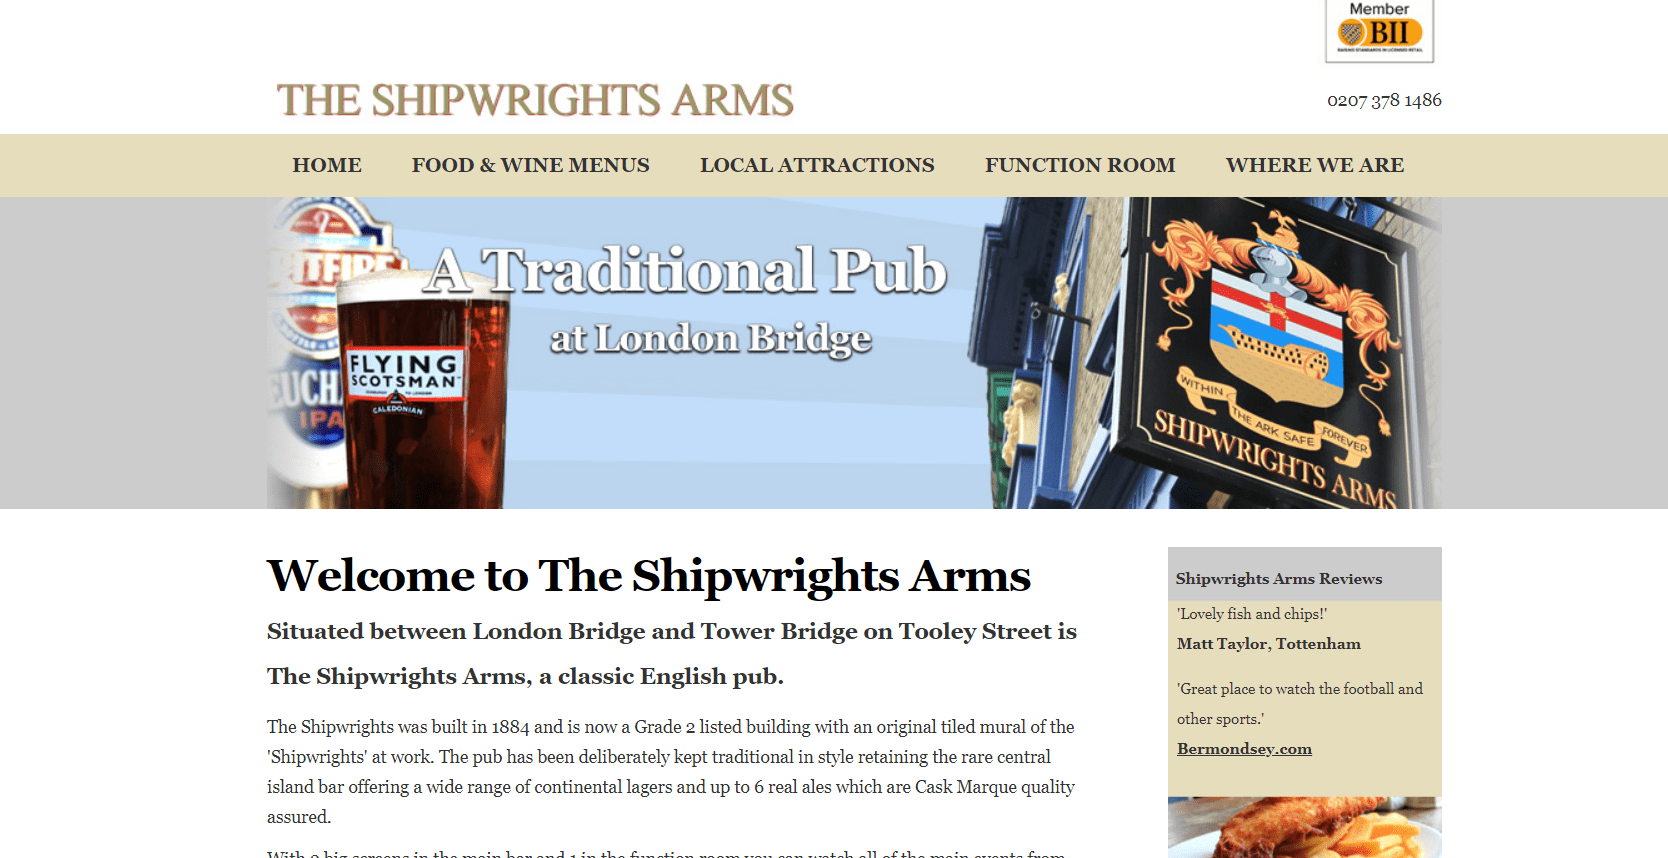 The Shipwrights Arms